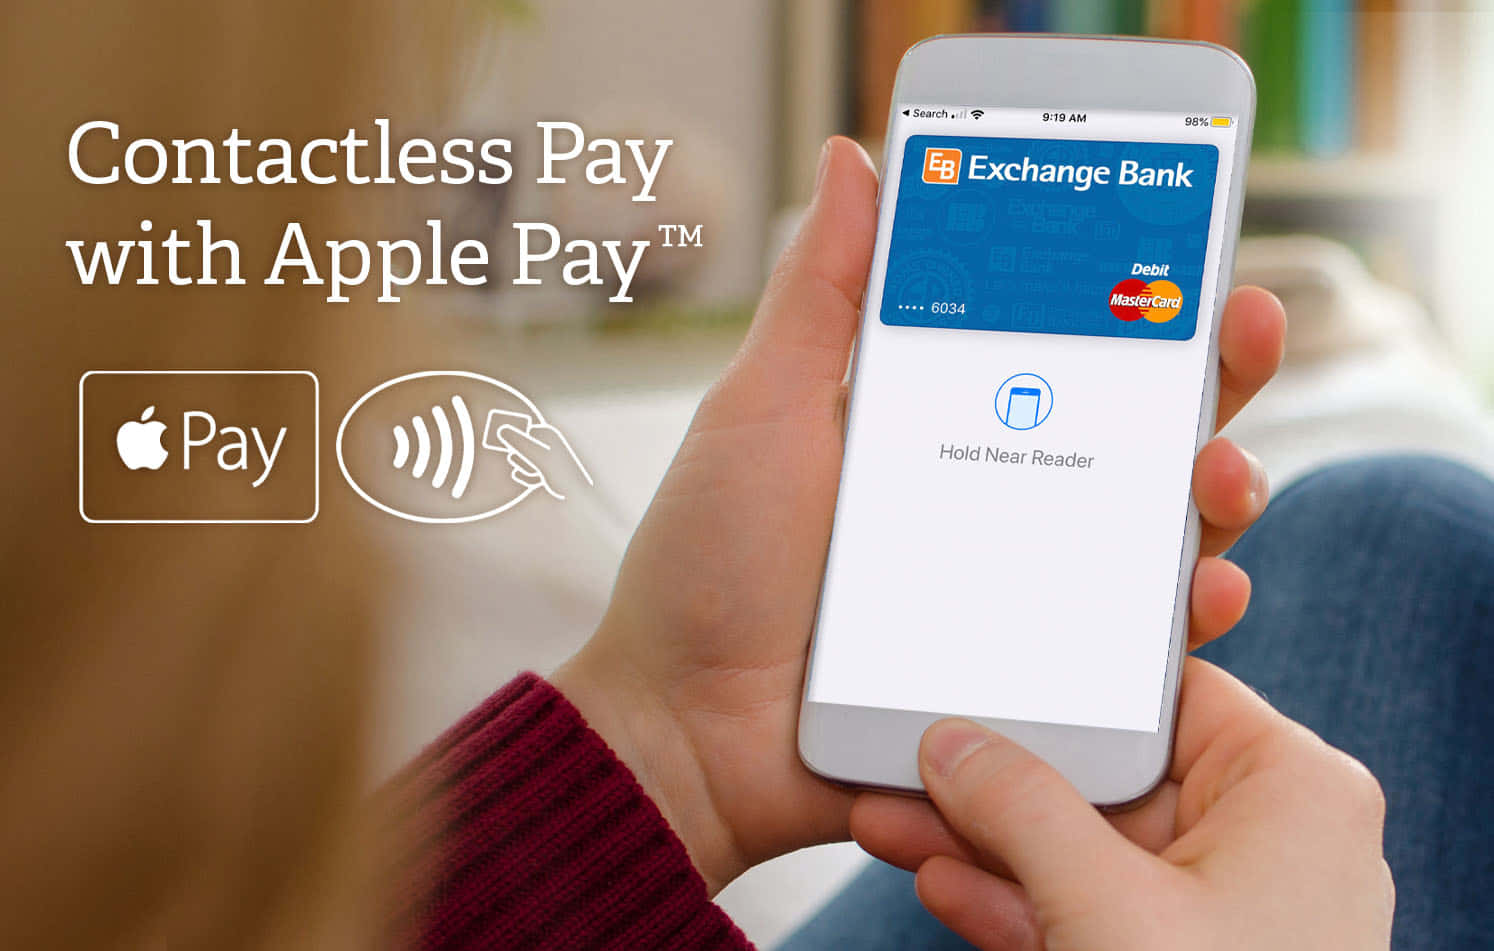 Make payments simpler and faster with Apple Pay